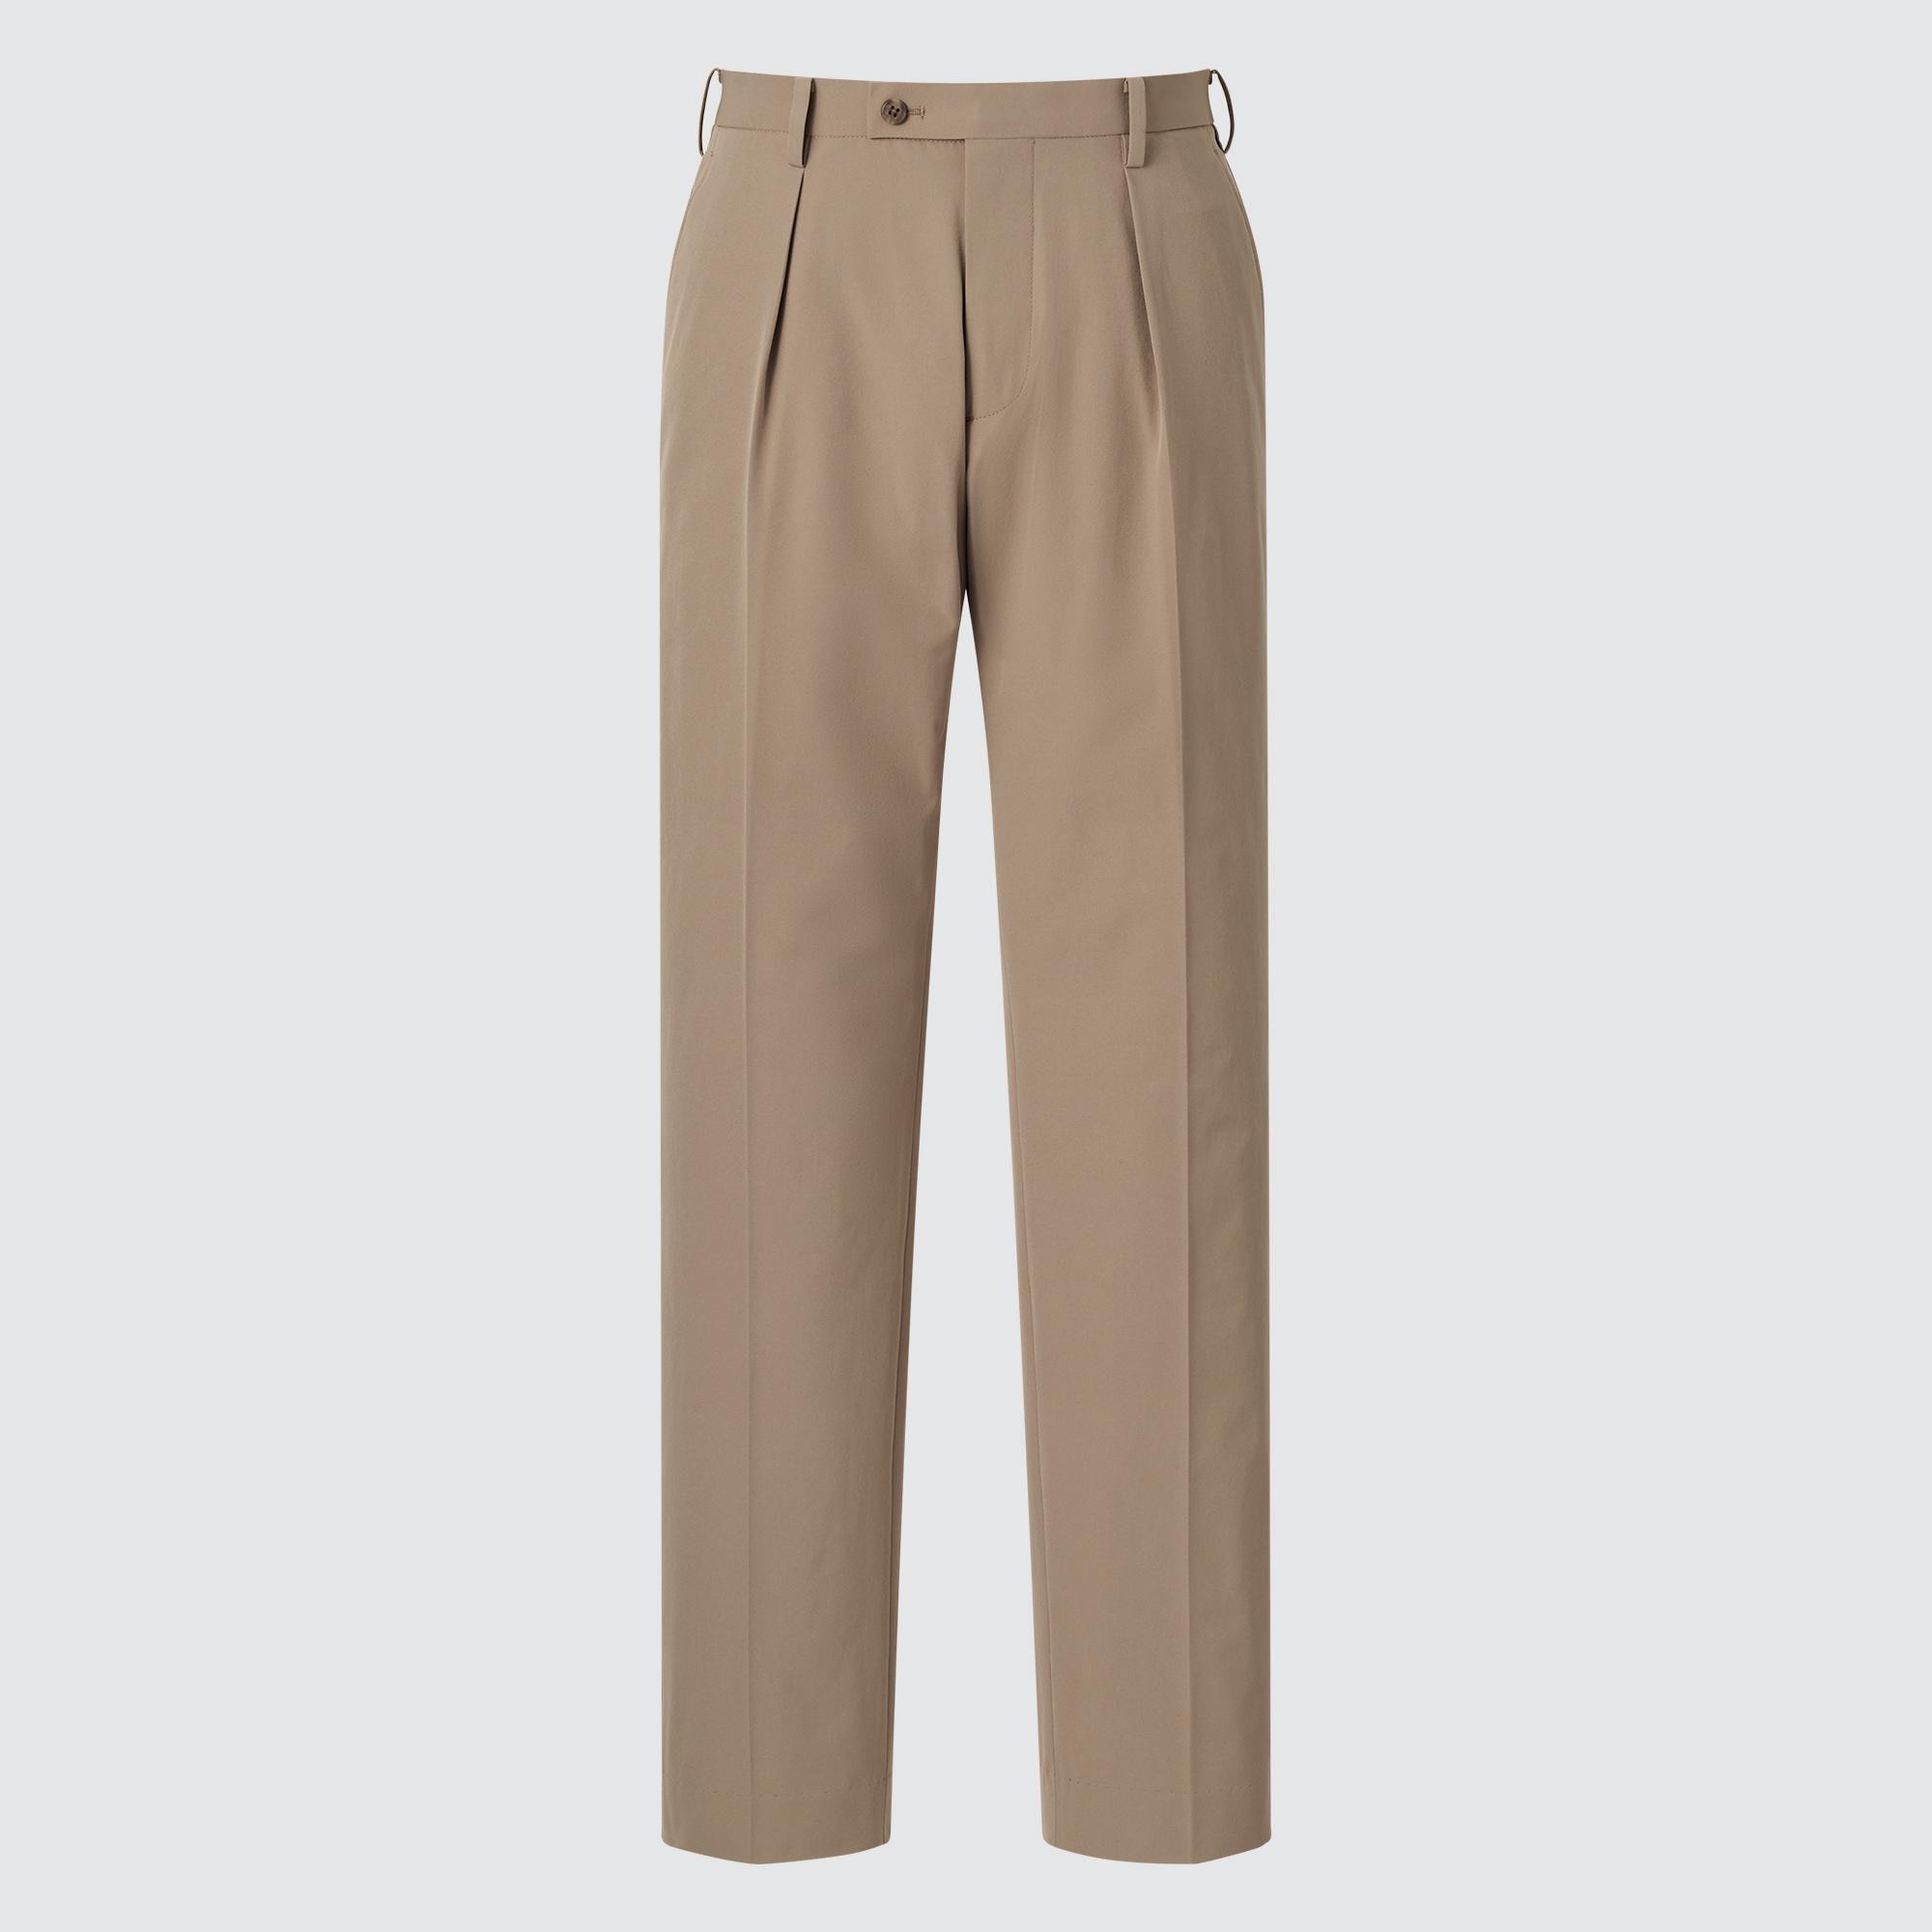 MEN UNIQLO U WIDE FIT PLEATED TAPERED TROUSERS | Tapered trousers, Wide  pants, Uniqlo